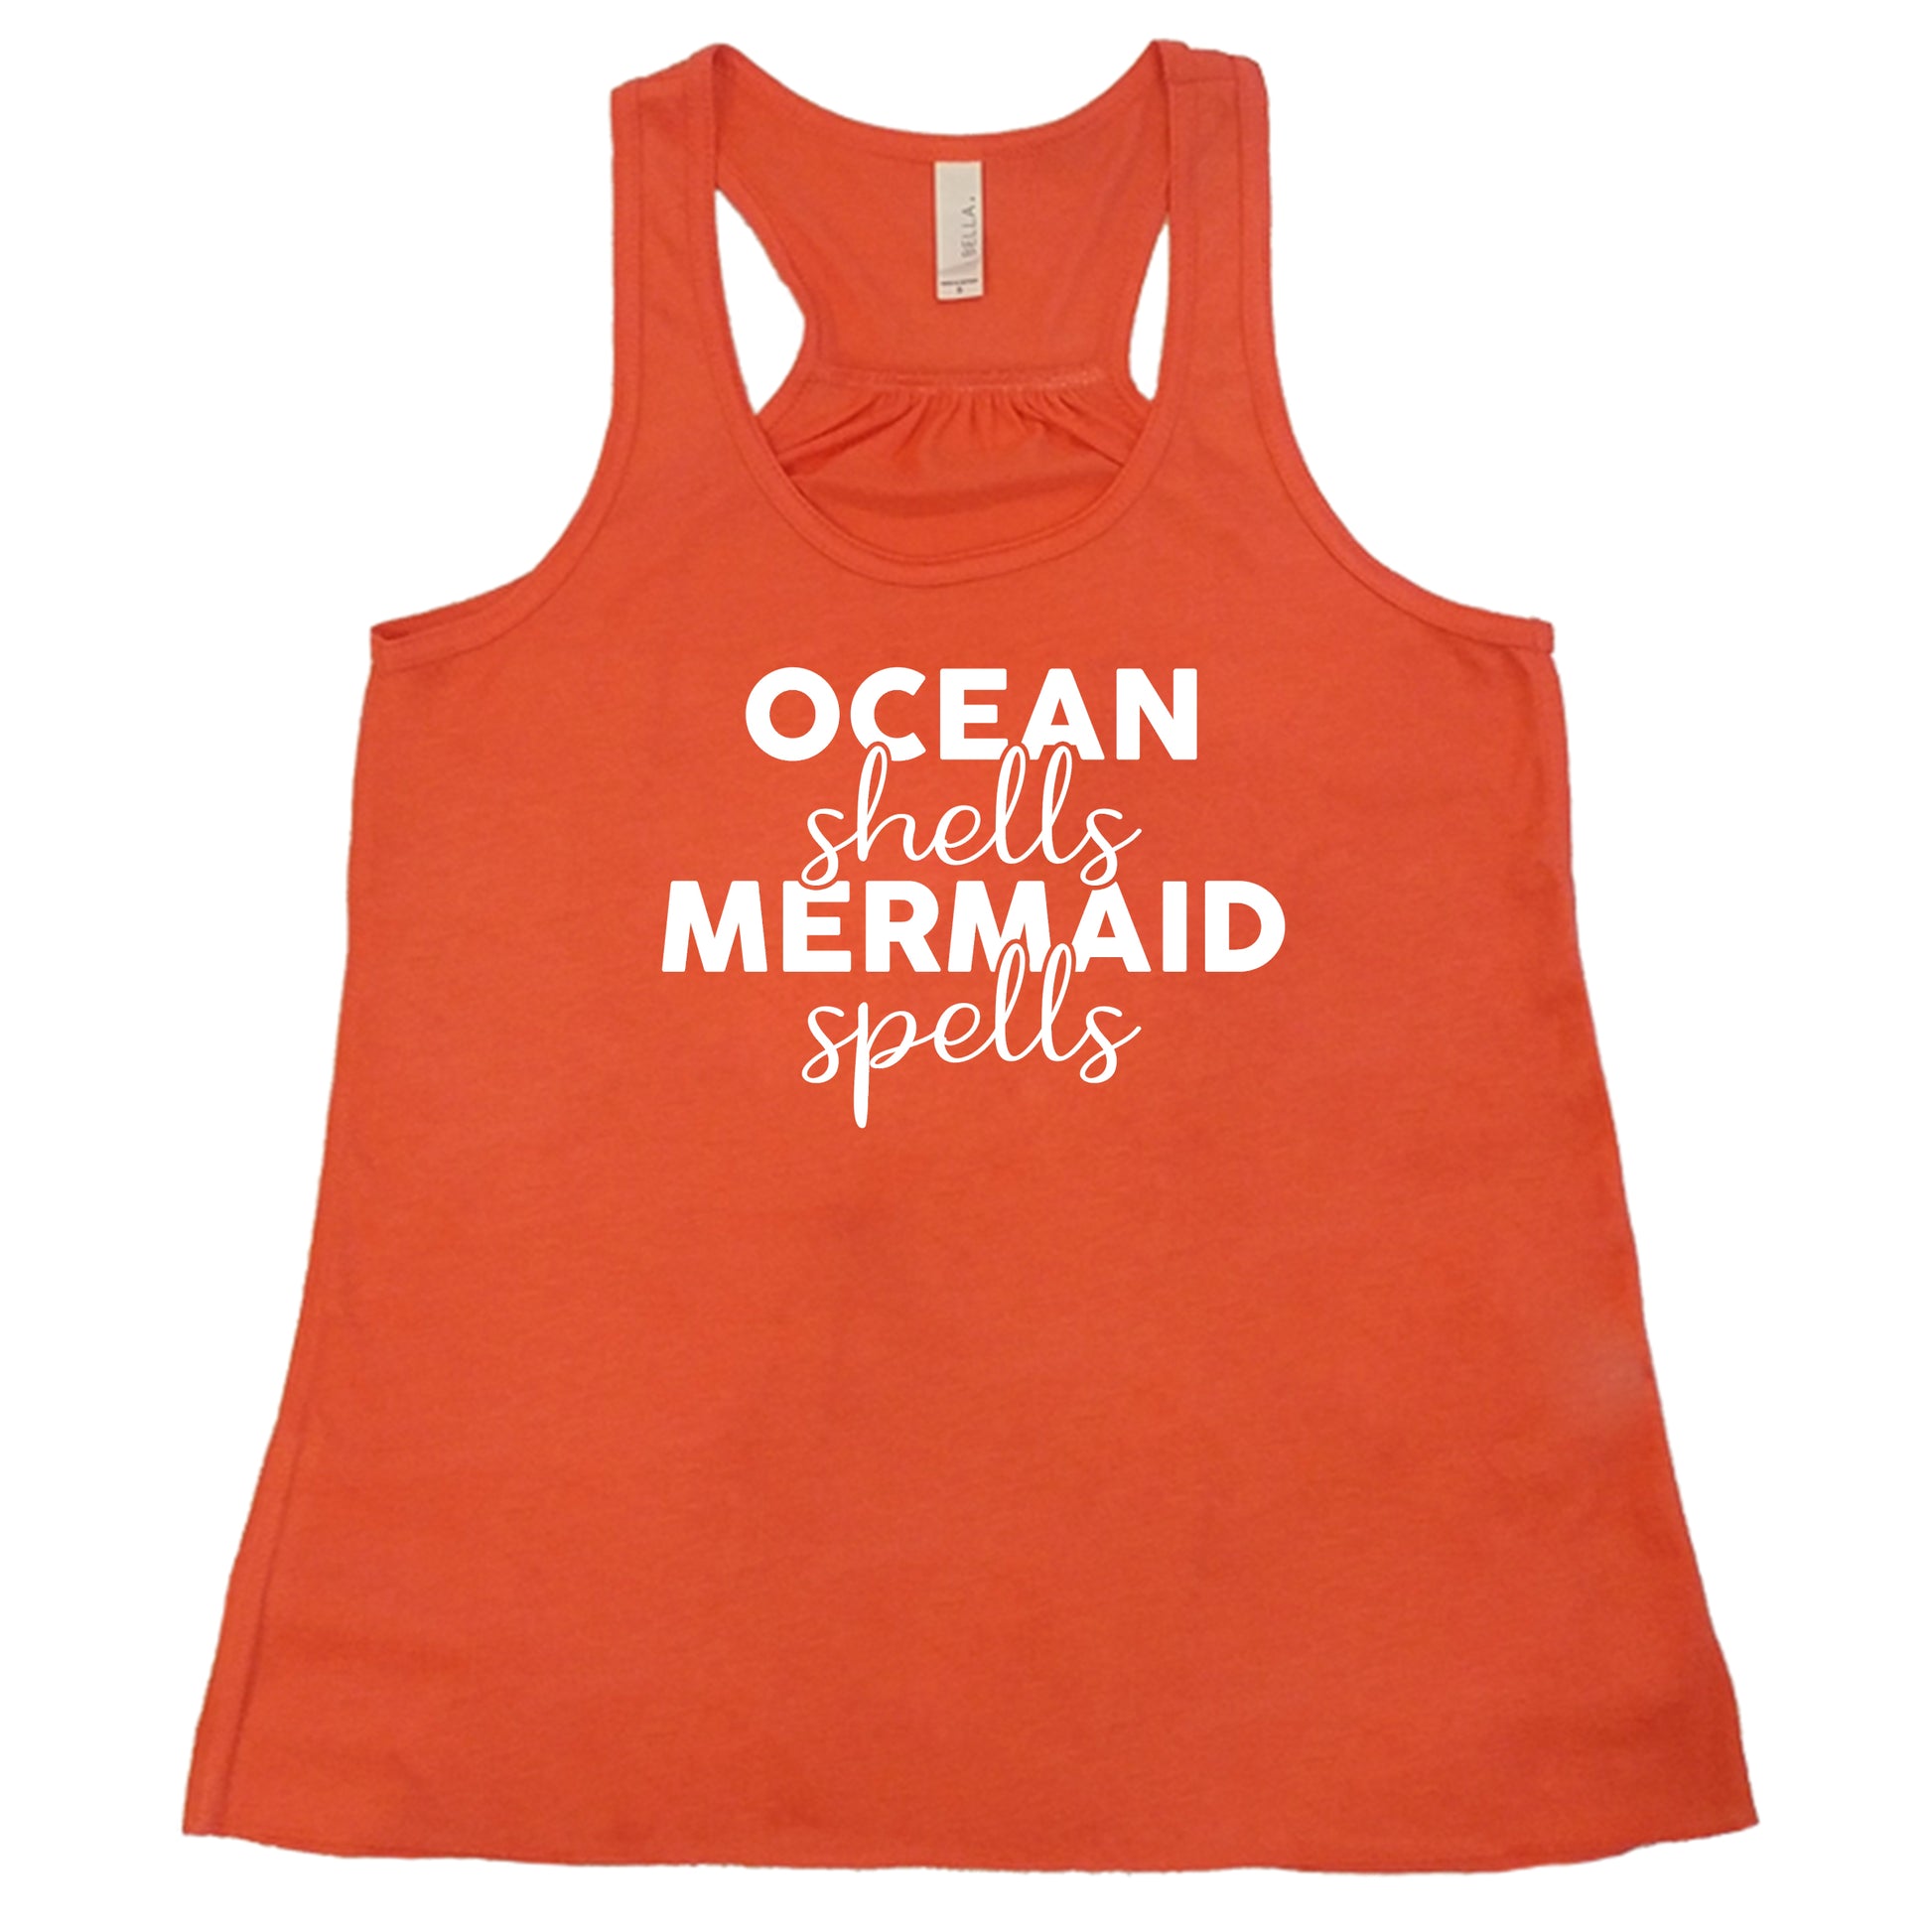 coral racerback tank with the saying "ocean shells mermaid spells" in white in the center